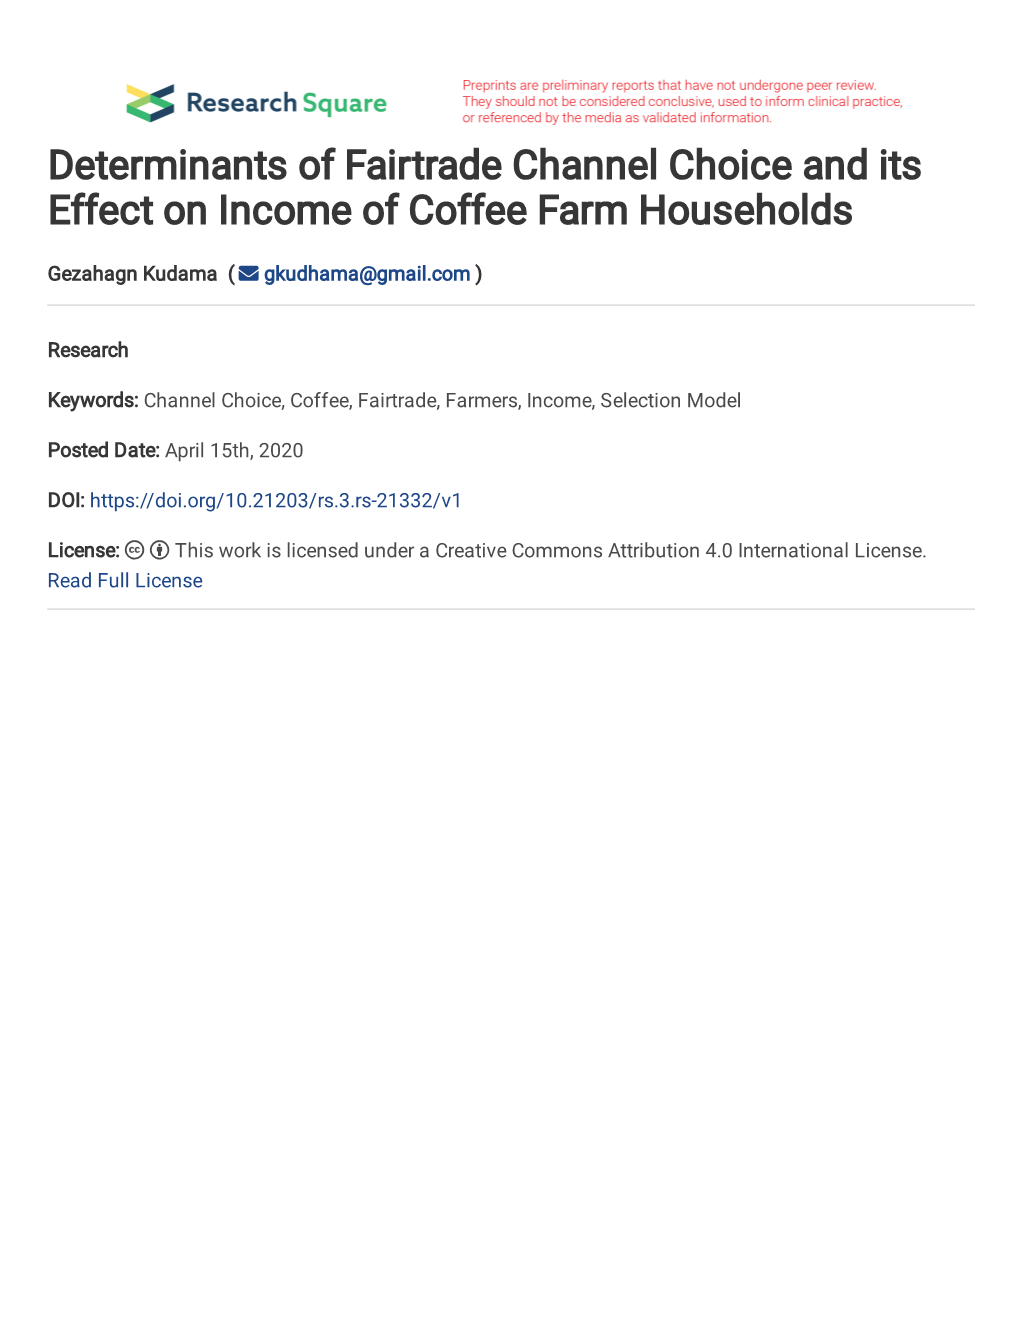 Determinants of Fairtrade Channel Choice and Its Effect on Income of Coffee Farm Households